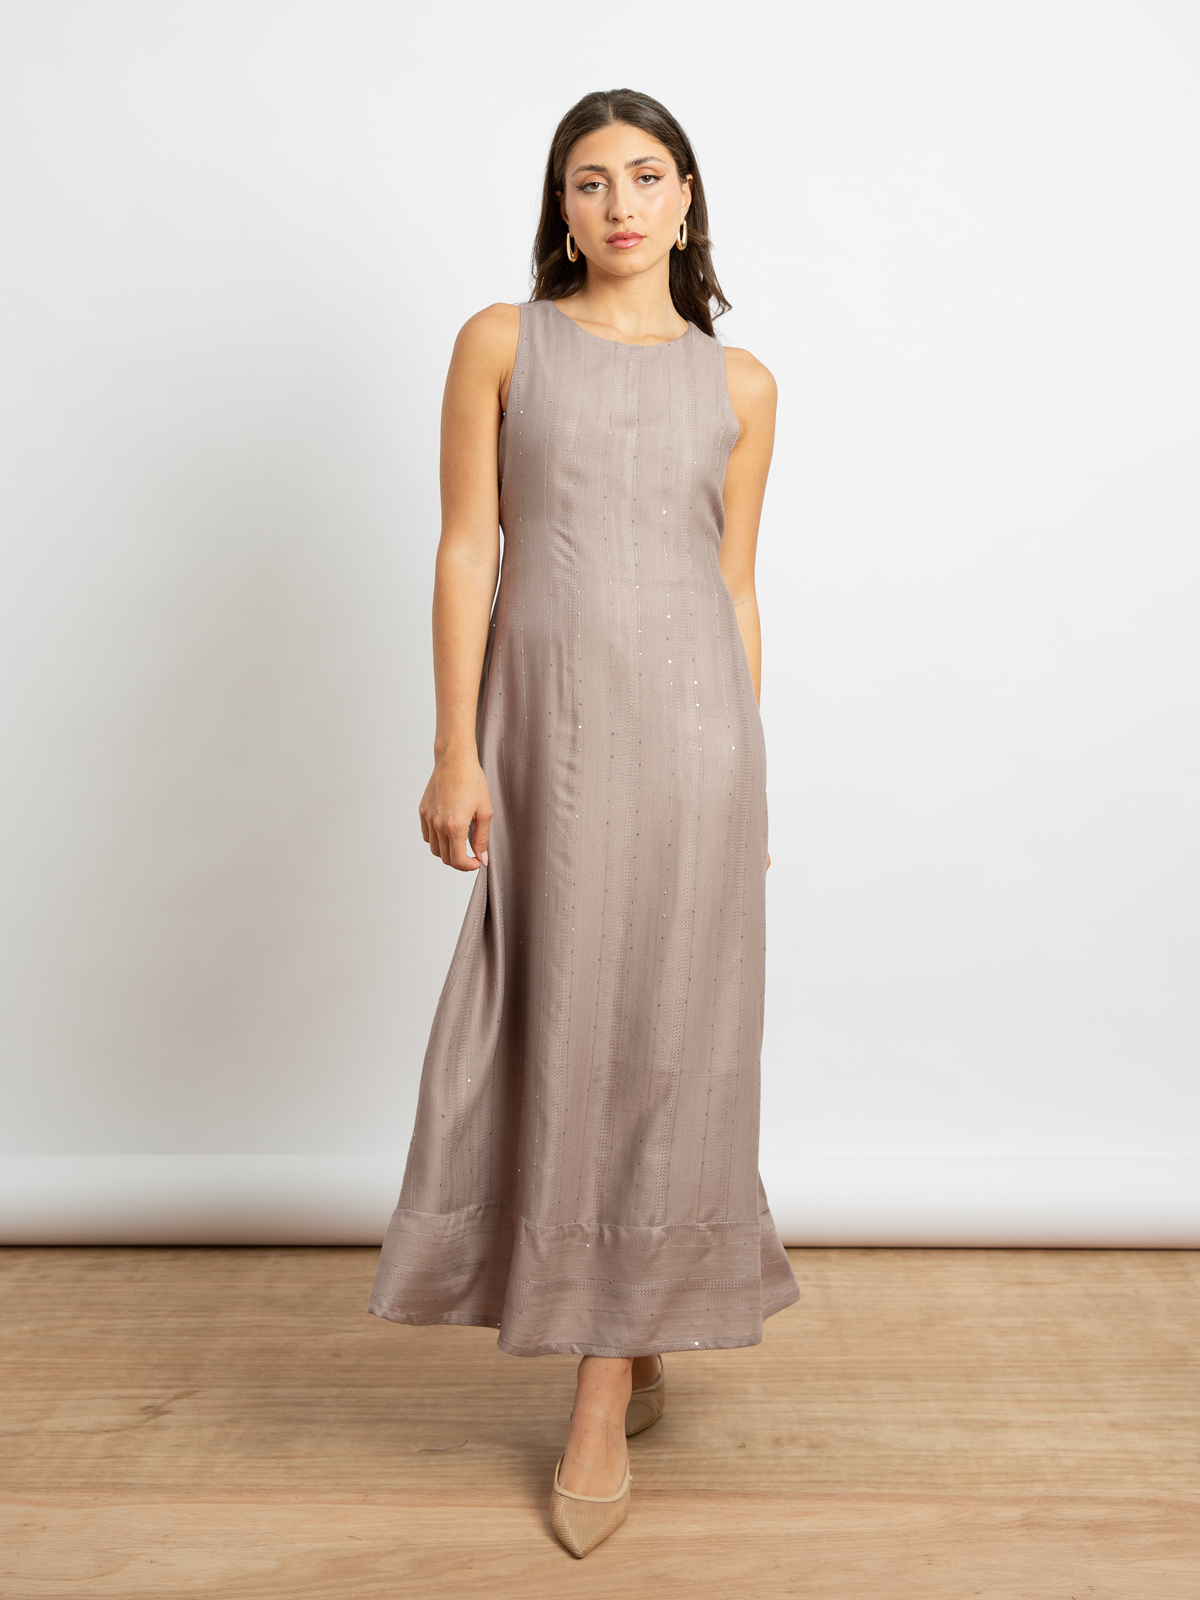 Rosewood Sequin Stripes - Sleeveless Long Dress with Belt